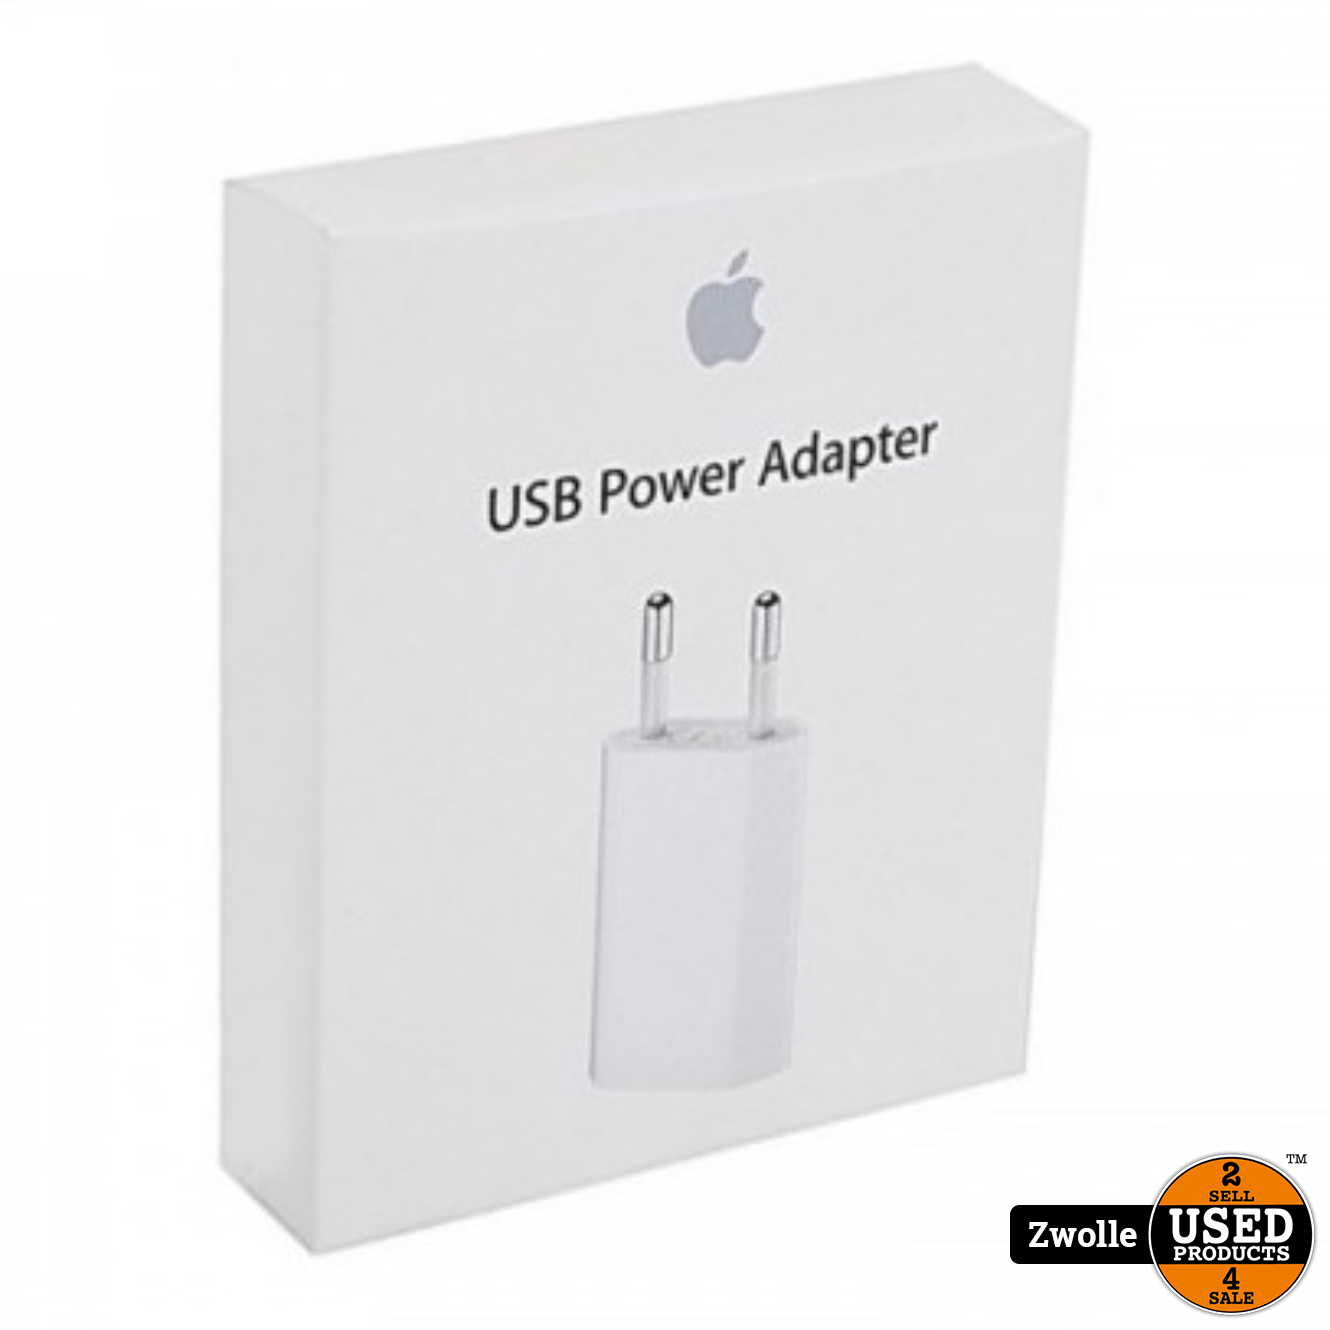 Apple iPhone USB Power Adapter 5W Used Products Zwolle